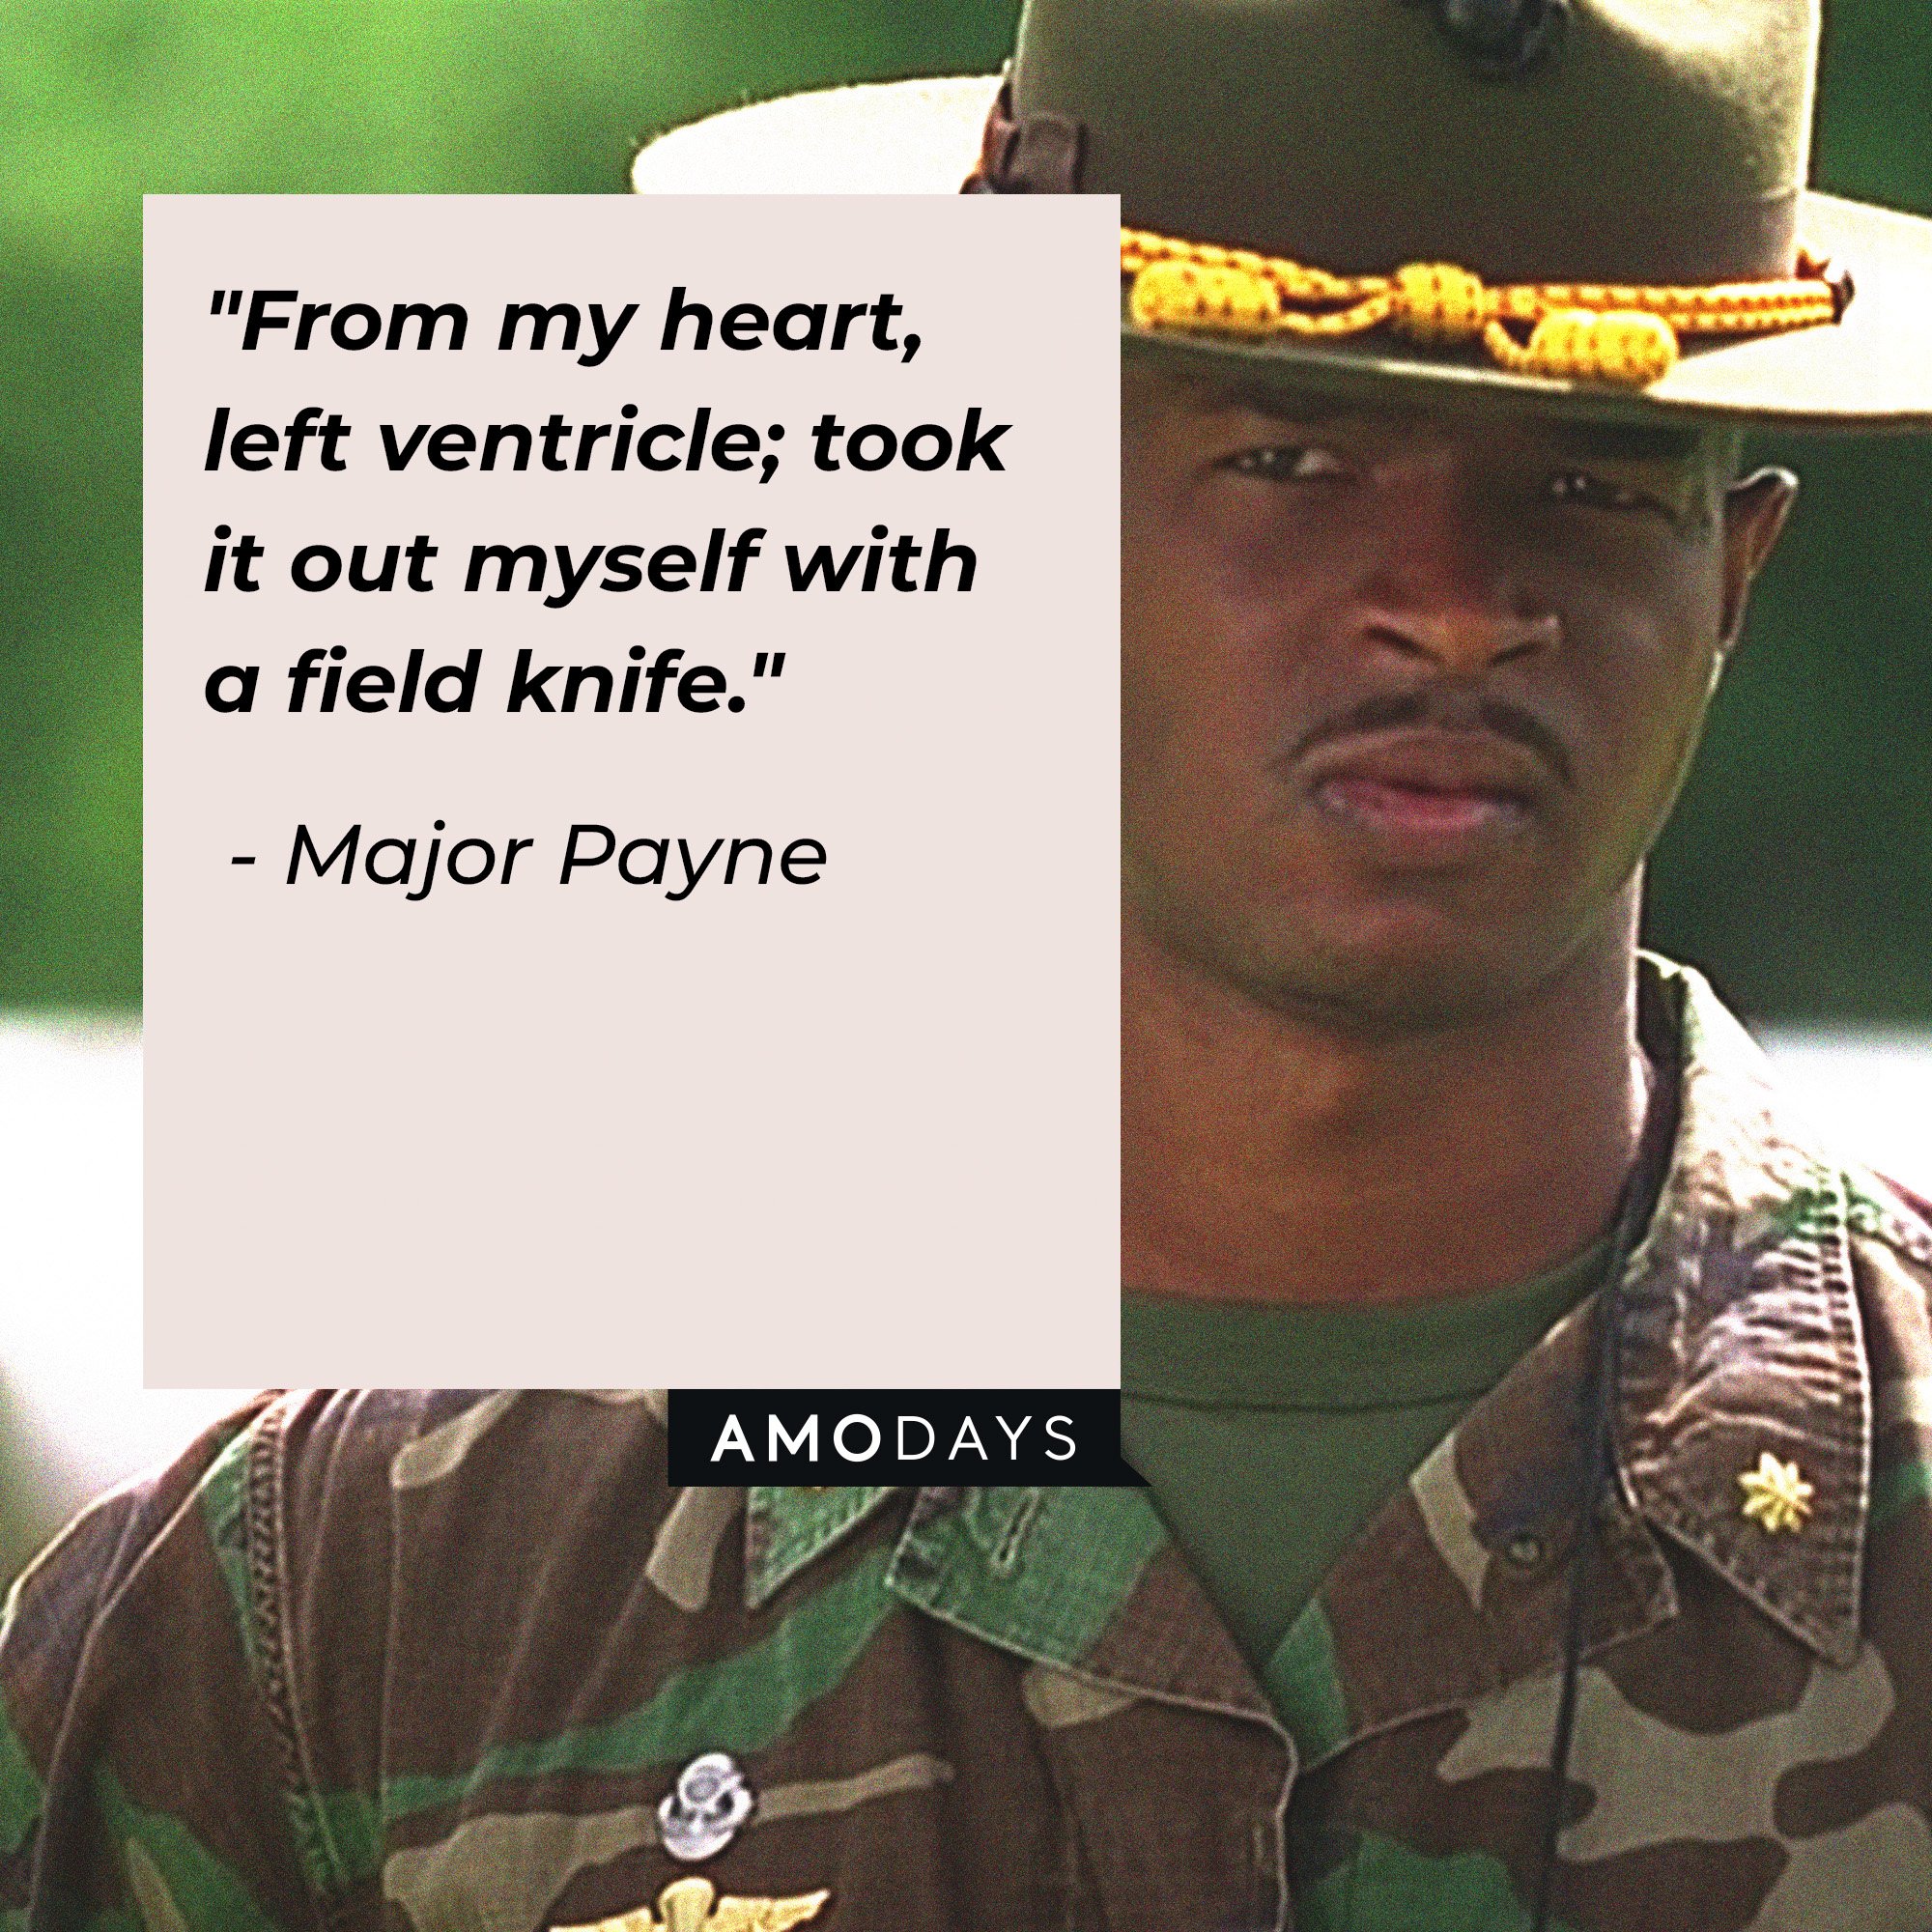 Major Payne's quote: "From my heart, left ventricle; took it out myself with a field knife." | Source: Amodays